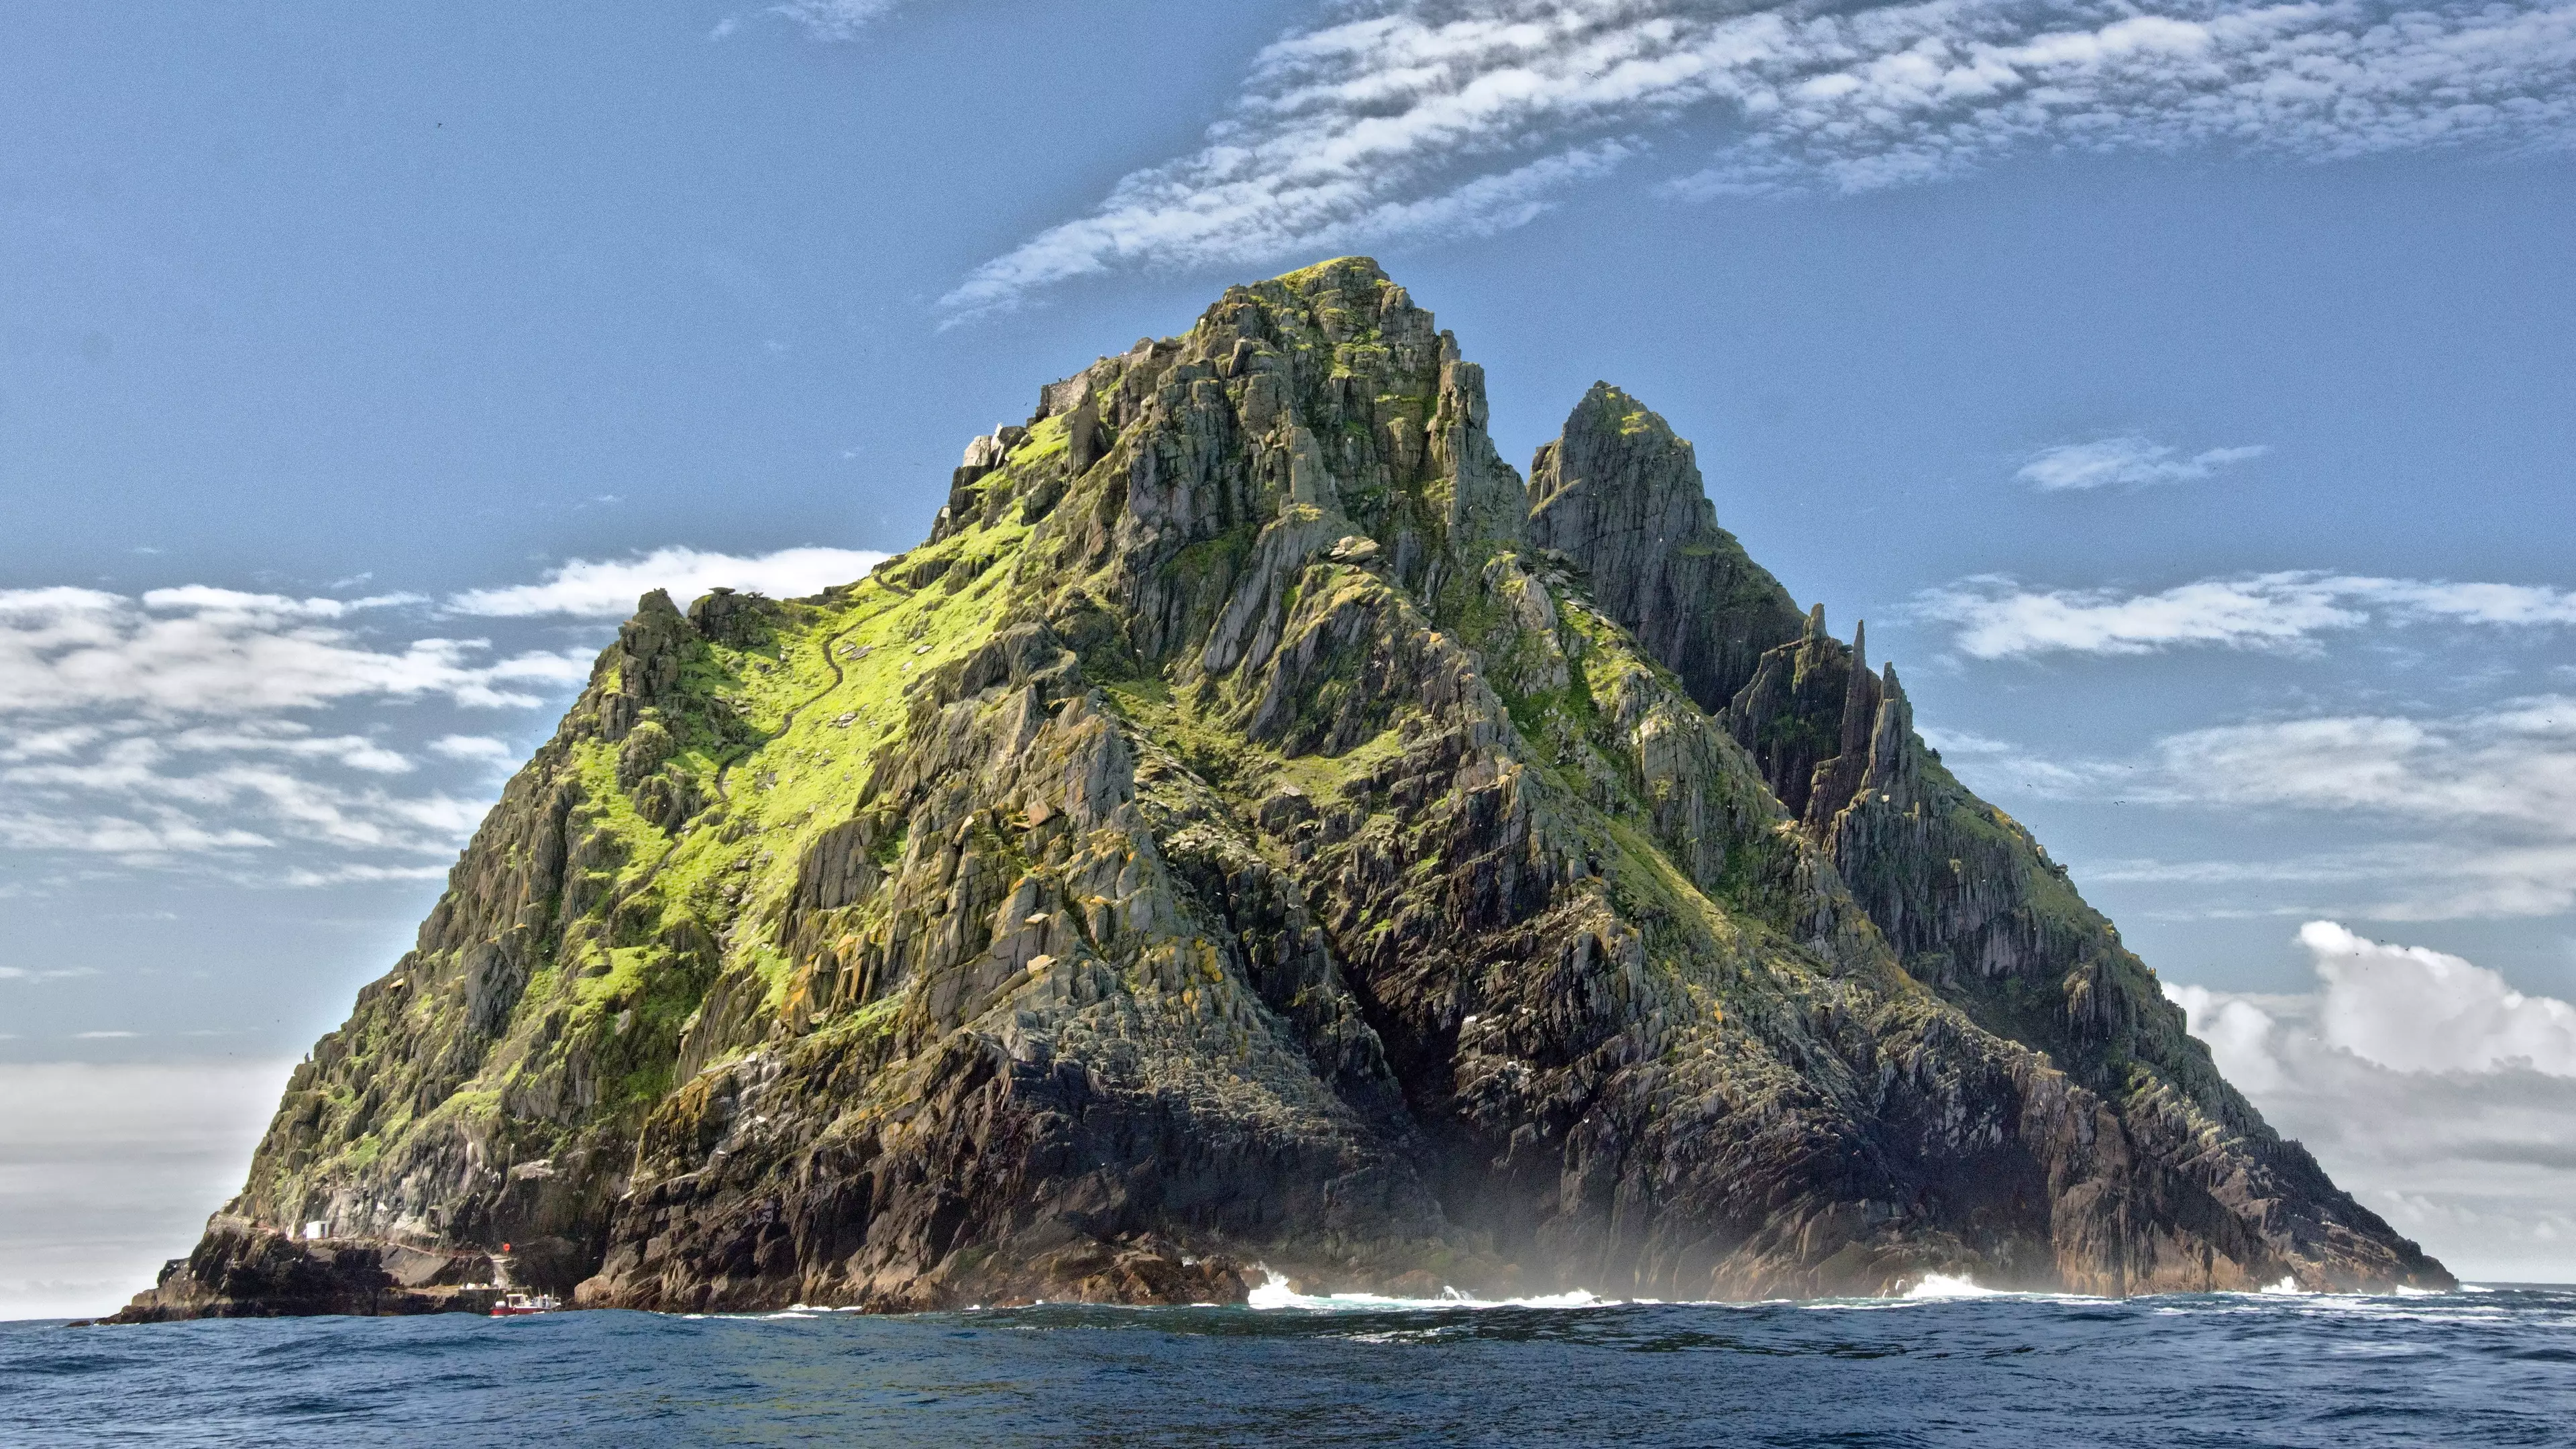 Skellig Michael Named One Of The World's Most Beautiful Movie Locations